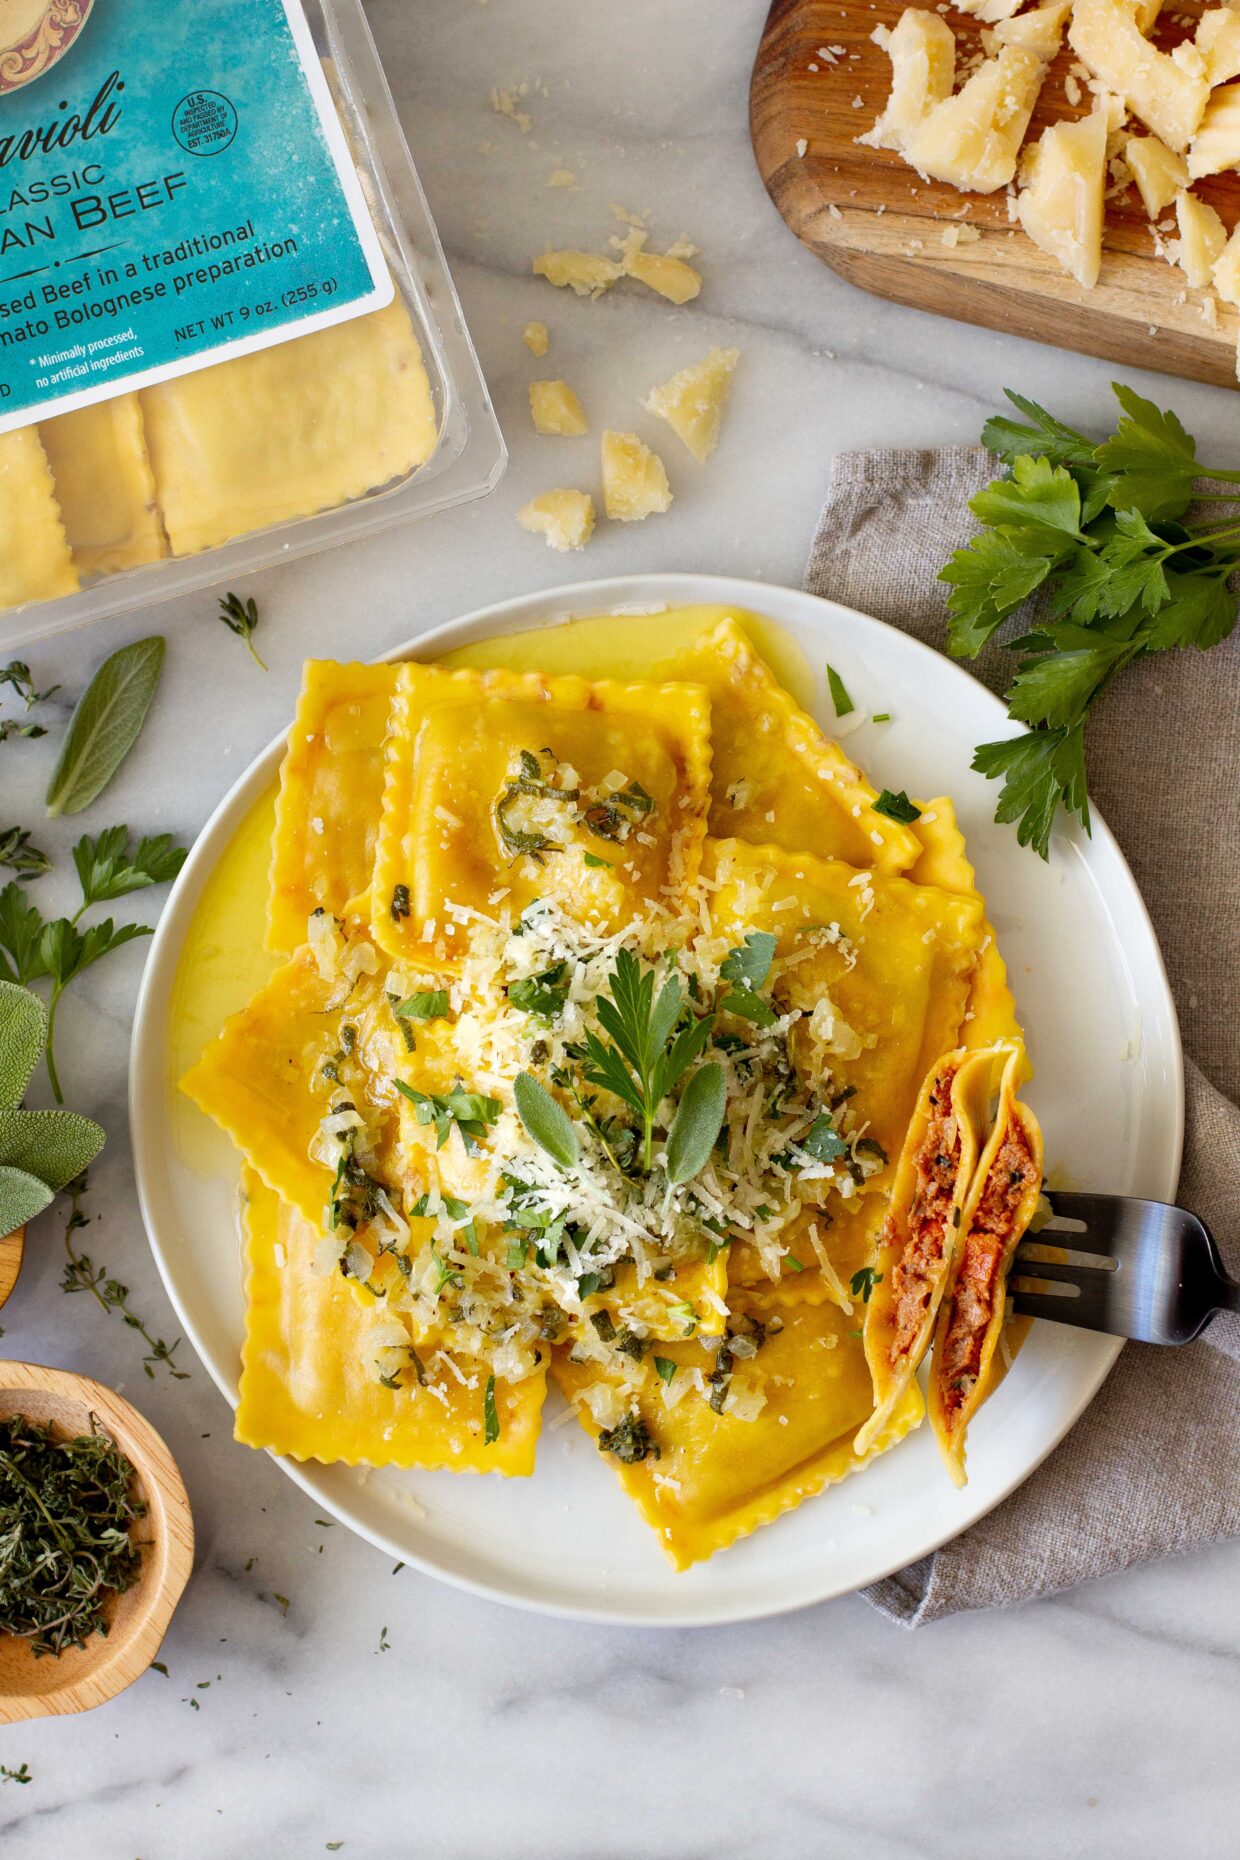 Classic Italian Beef Bolognese Ravioli with Aromatic Herbs